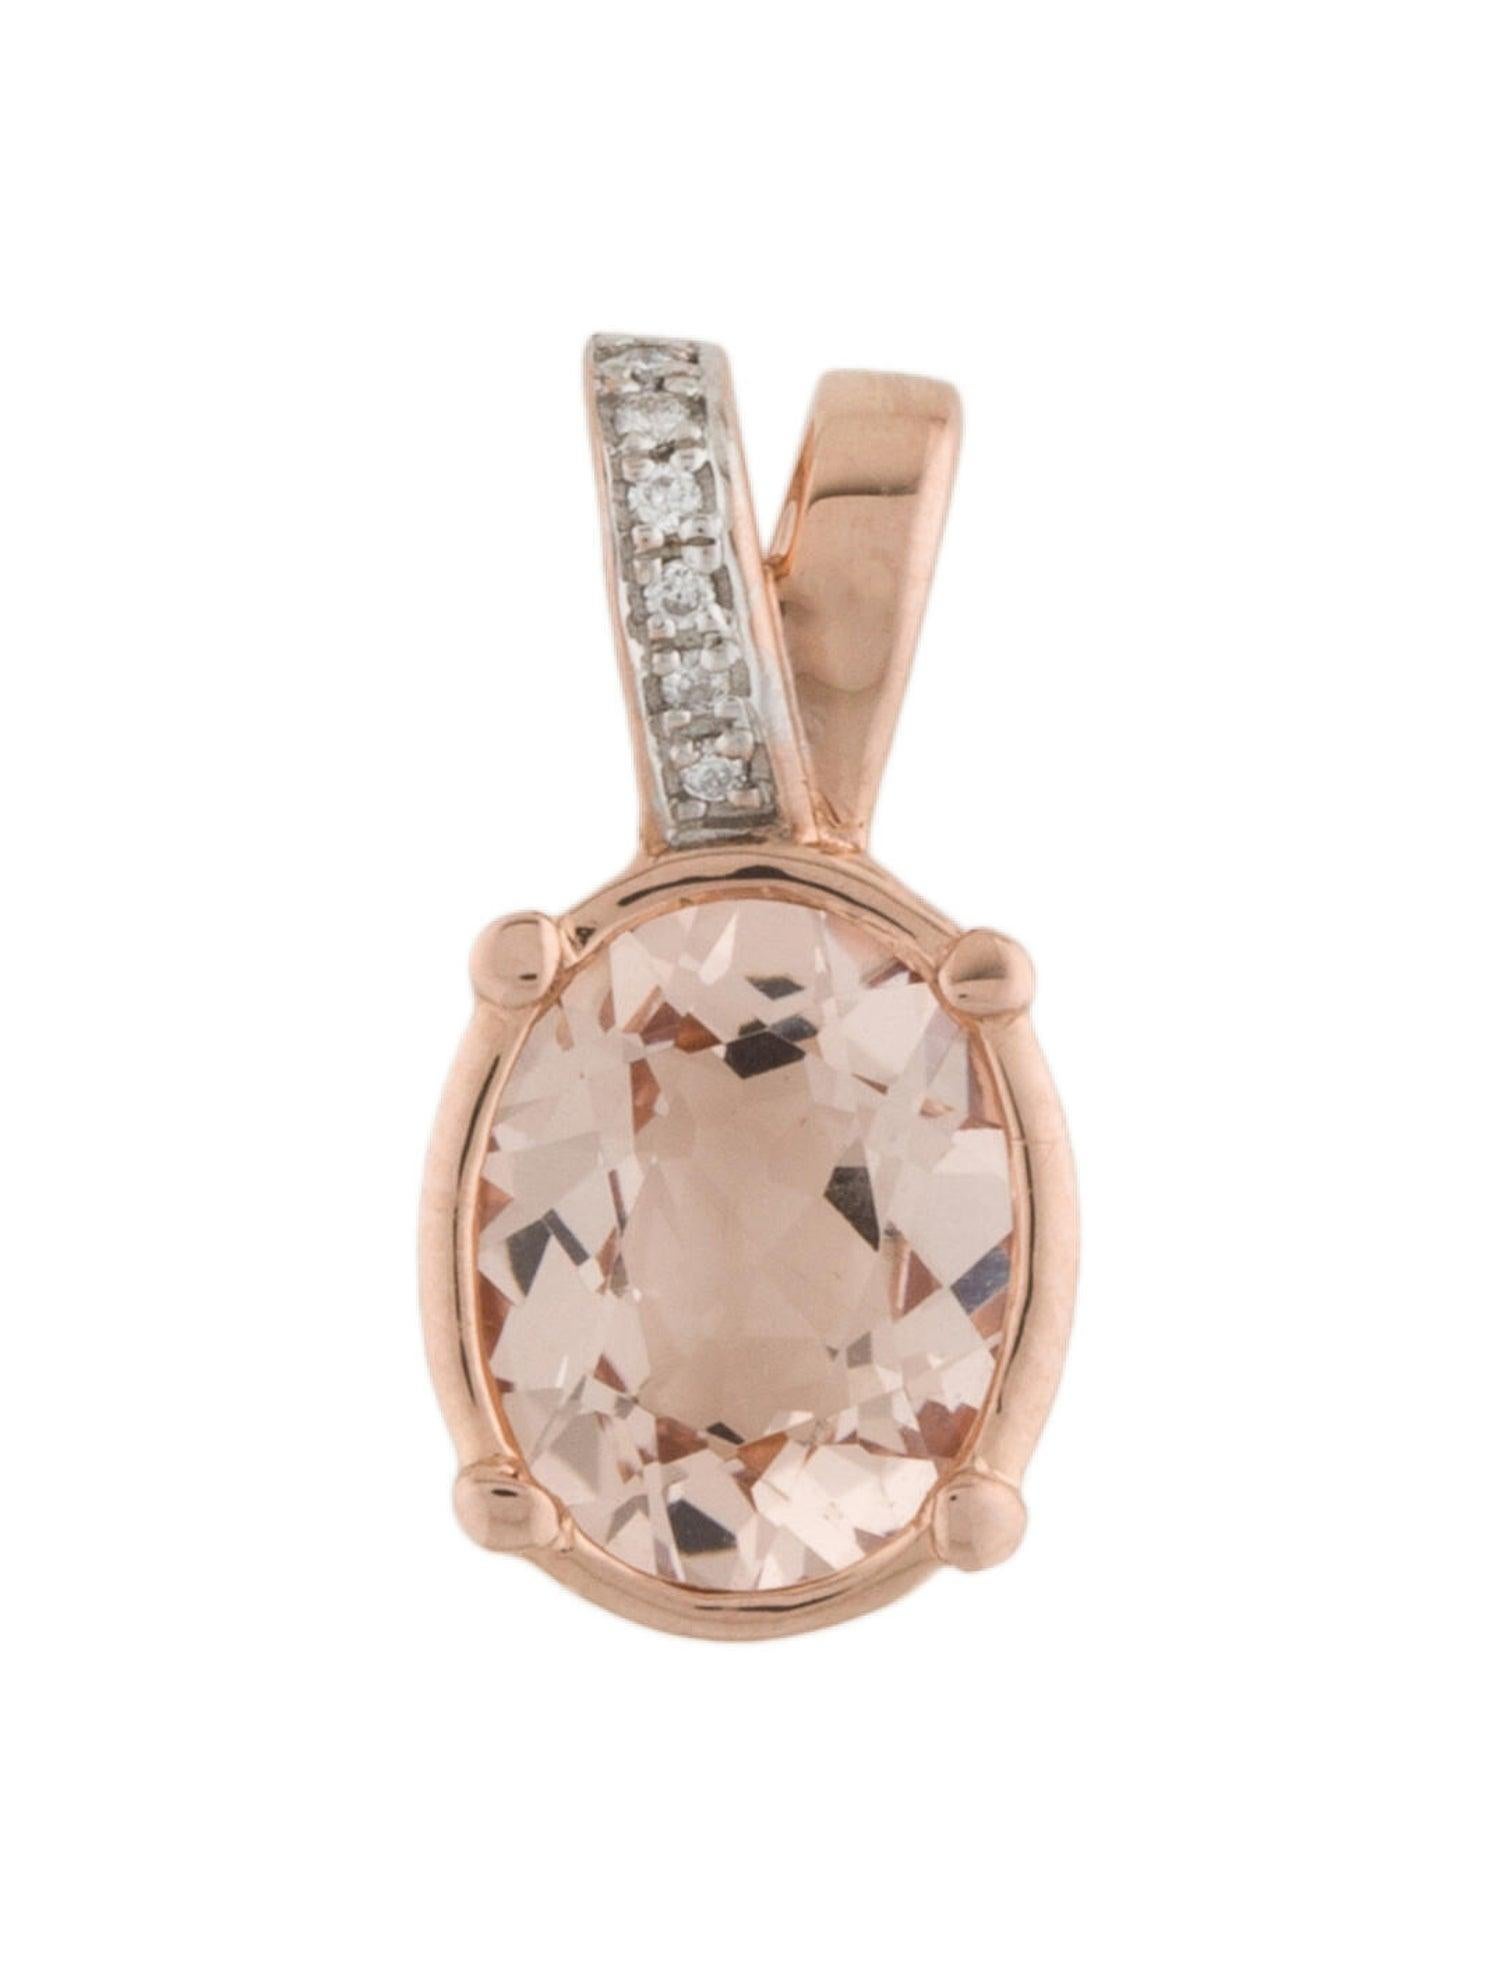 Luxurious 14K Diamond & Morganite Pendant - Elegant Gemstone Statement Piece In New Condition For Sale In Holtsville, NY